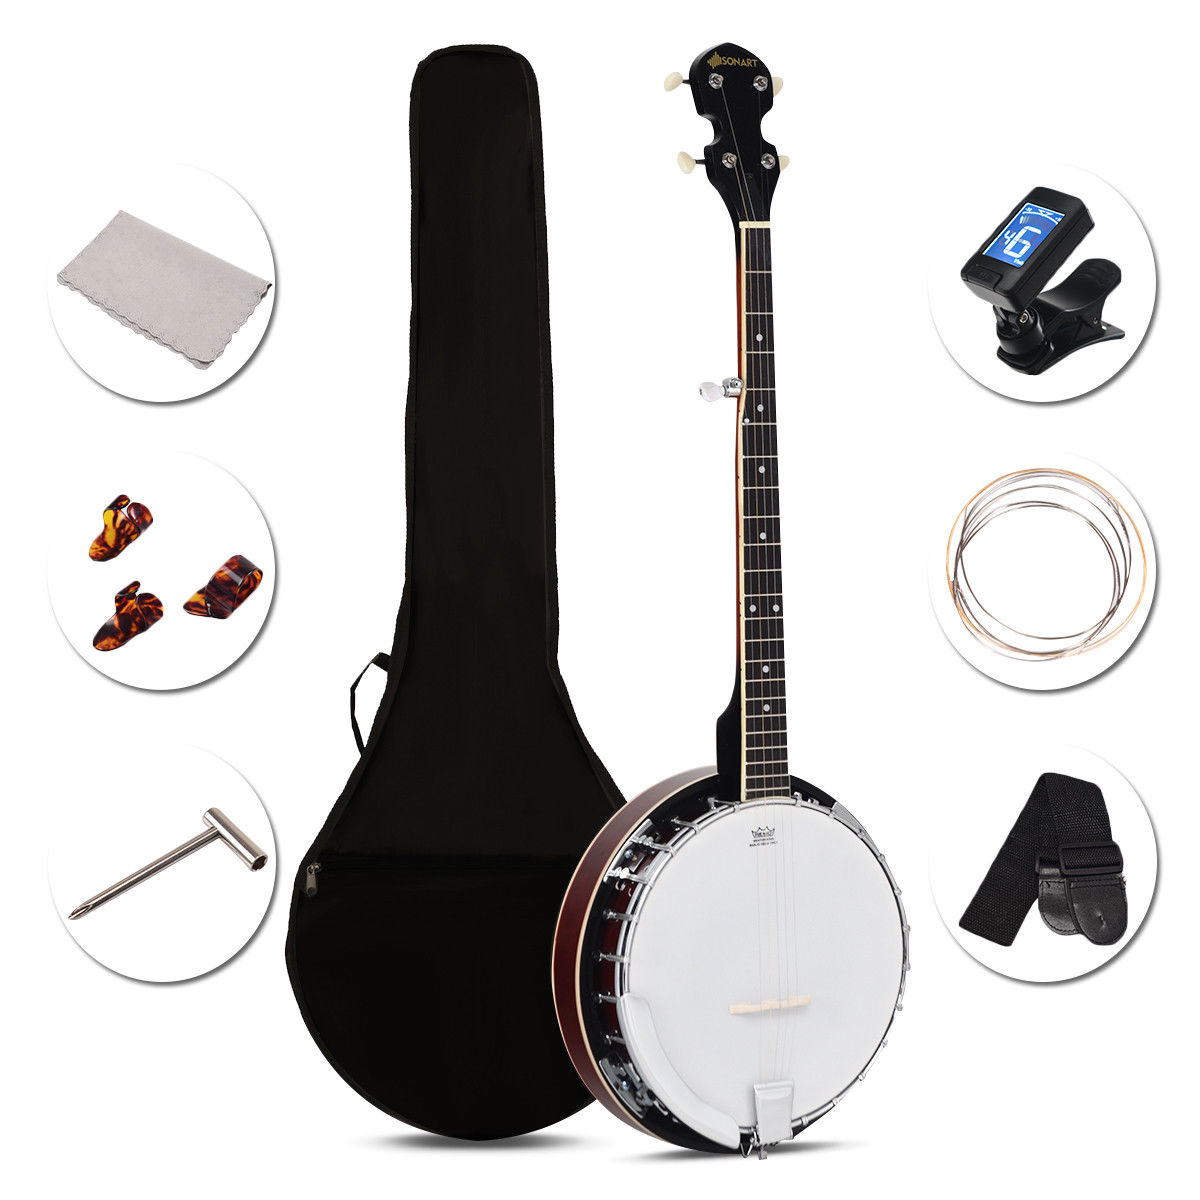 Costway Sonart 5 String Geared Tunable Banjo 24 Brackets Closed Back Remo Head w/ Case - image 1 of 10